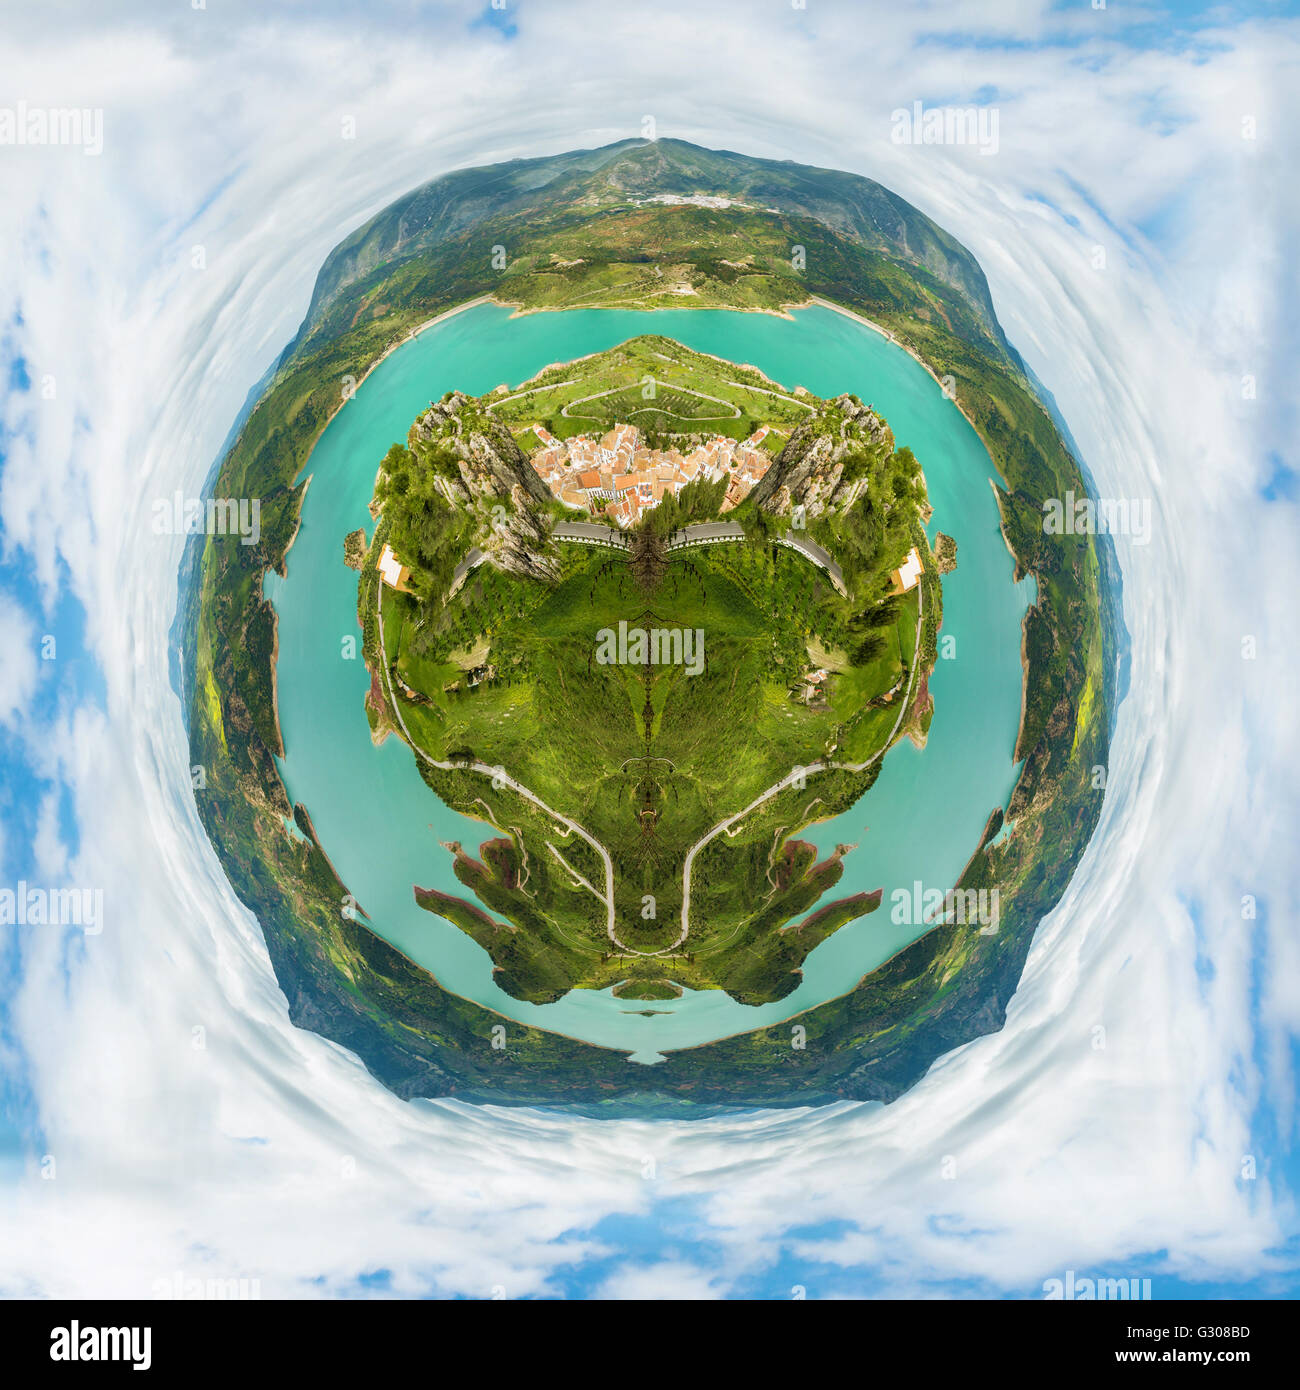 Little planet earth Stock Photo